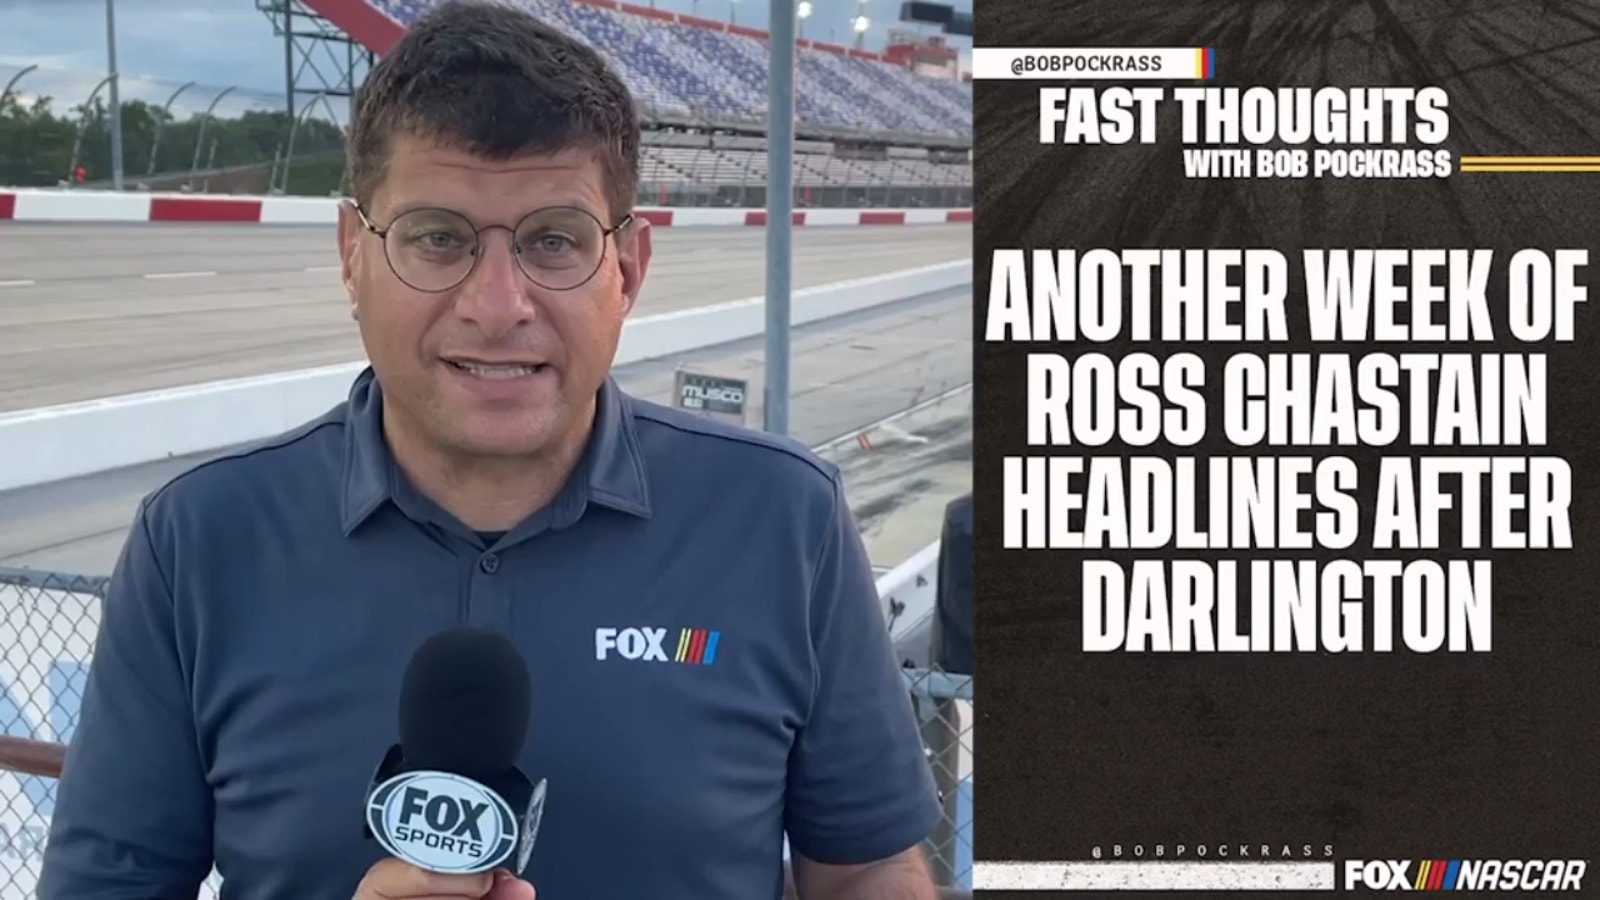 Are the Ross Chastain antics getting old? | Fast Thoughts with Bob Pockrass